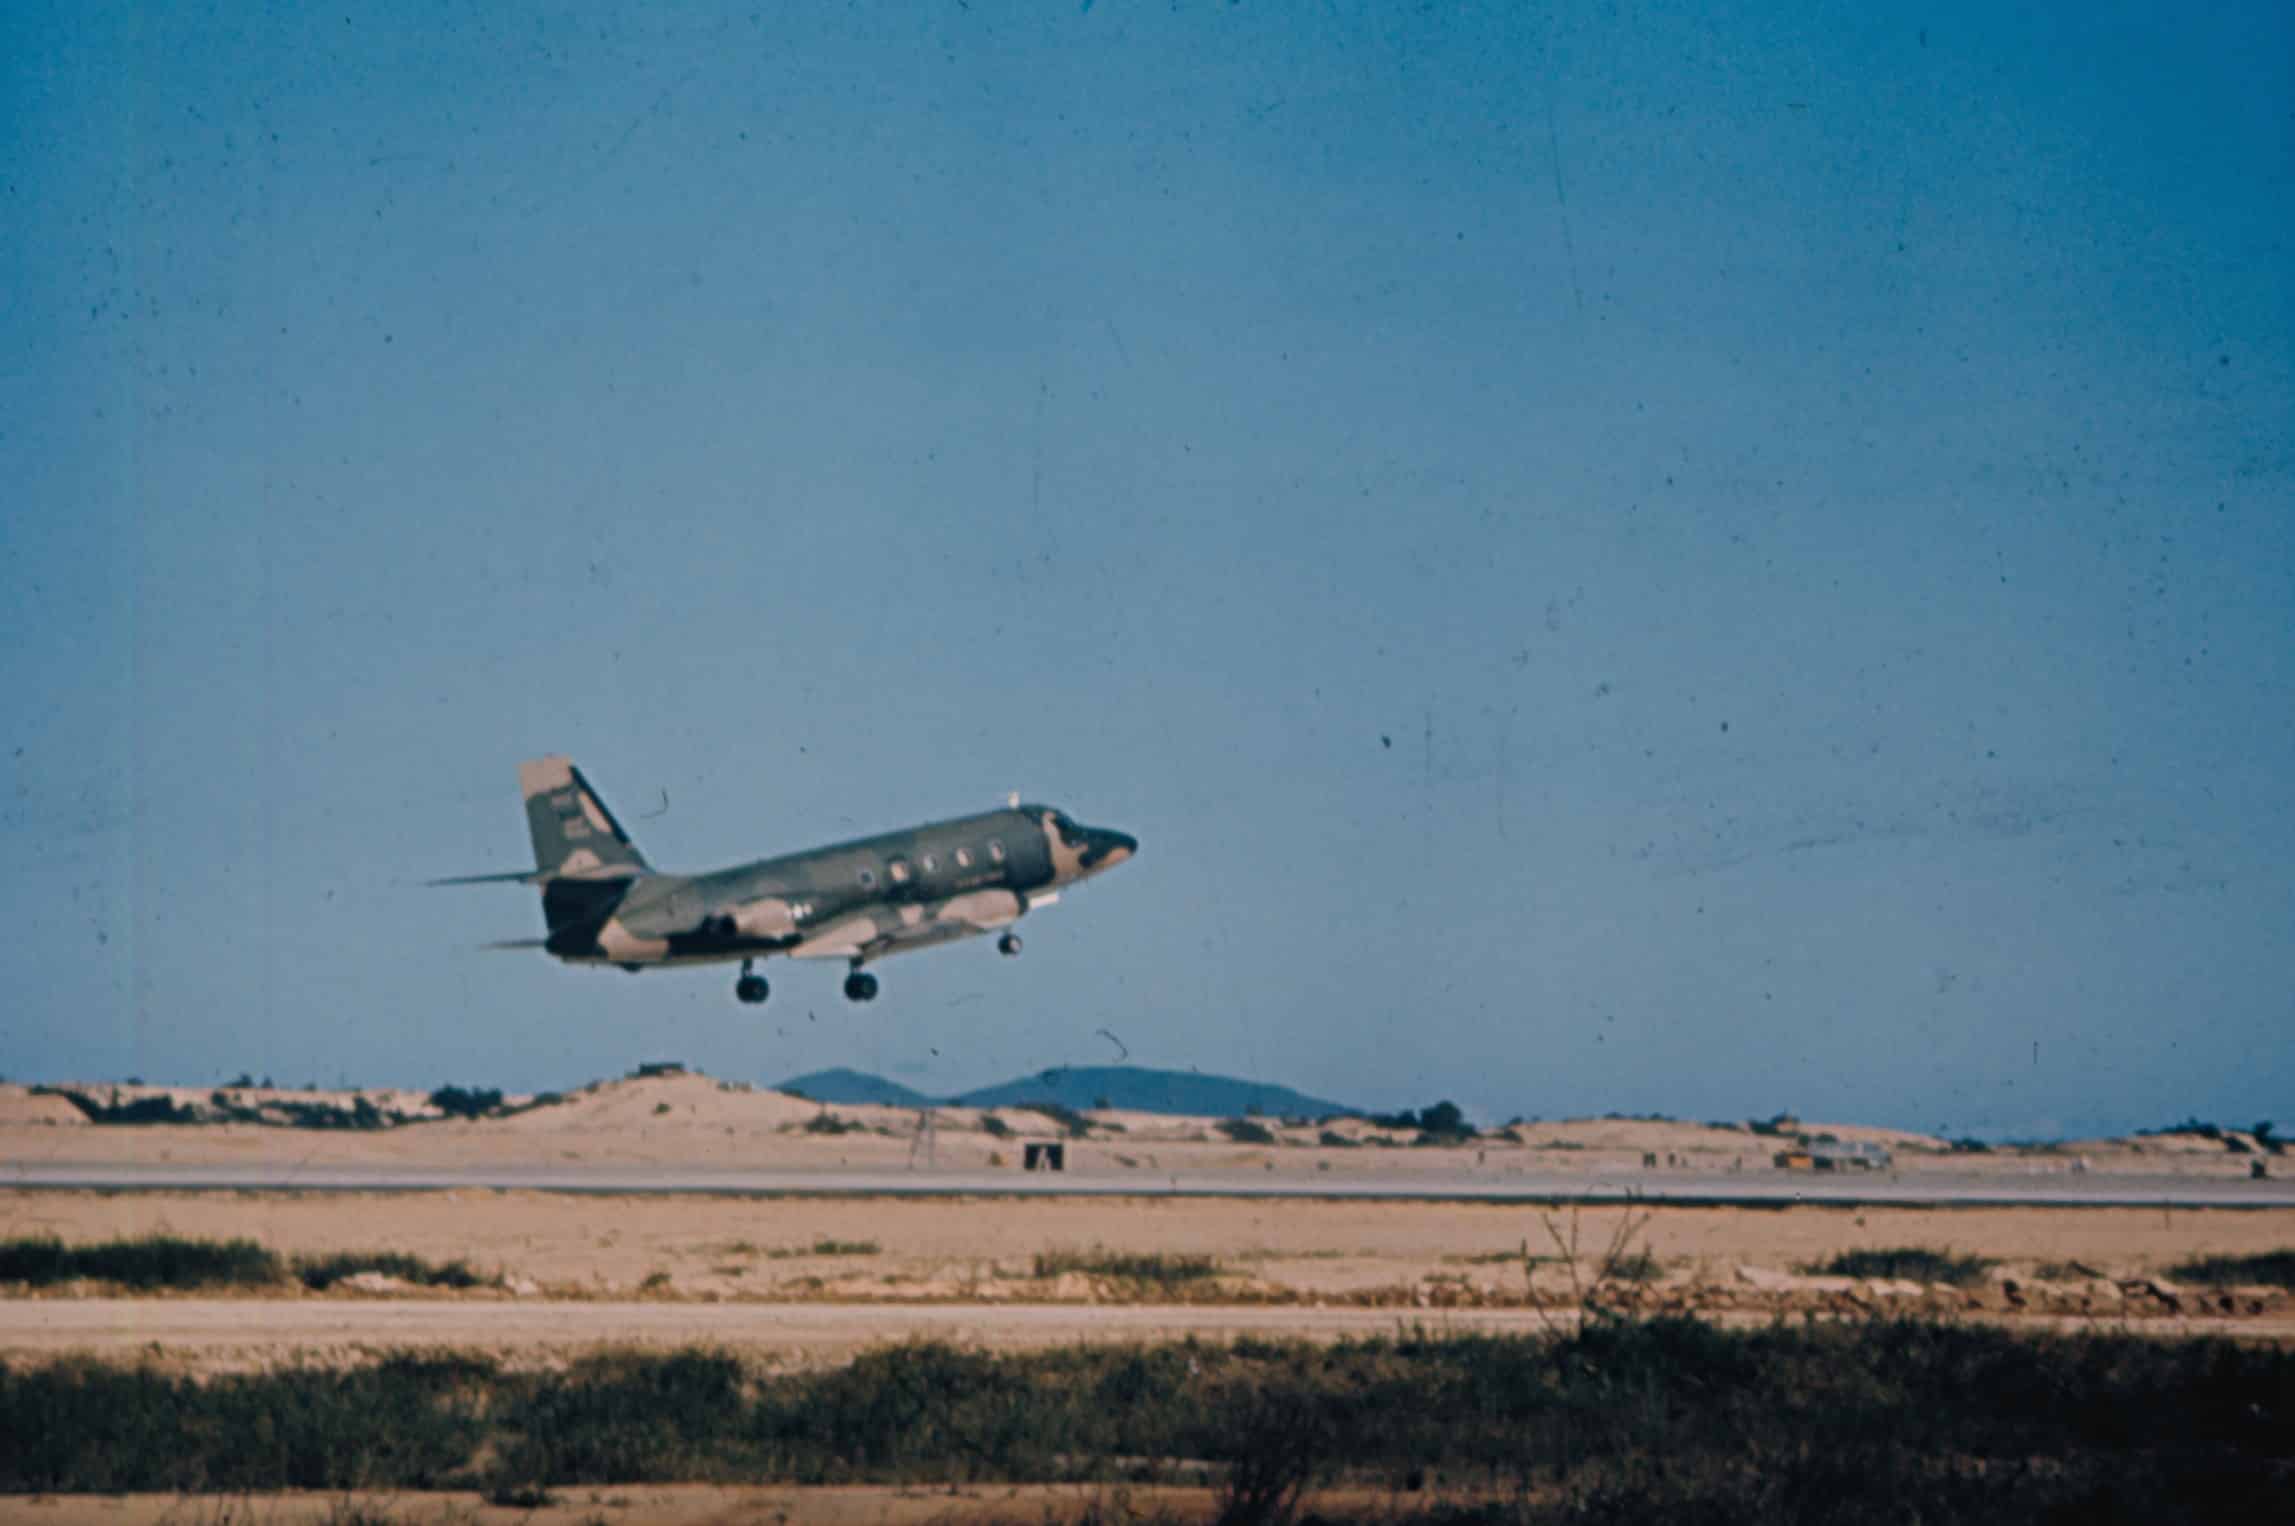 JetStars wore a camouflage paint scheme for operations in Southeast Asia during the  Vietnam War. This C-140A is taking off from Tan Son Nhut Air Base in South Vietnam.